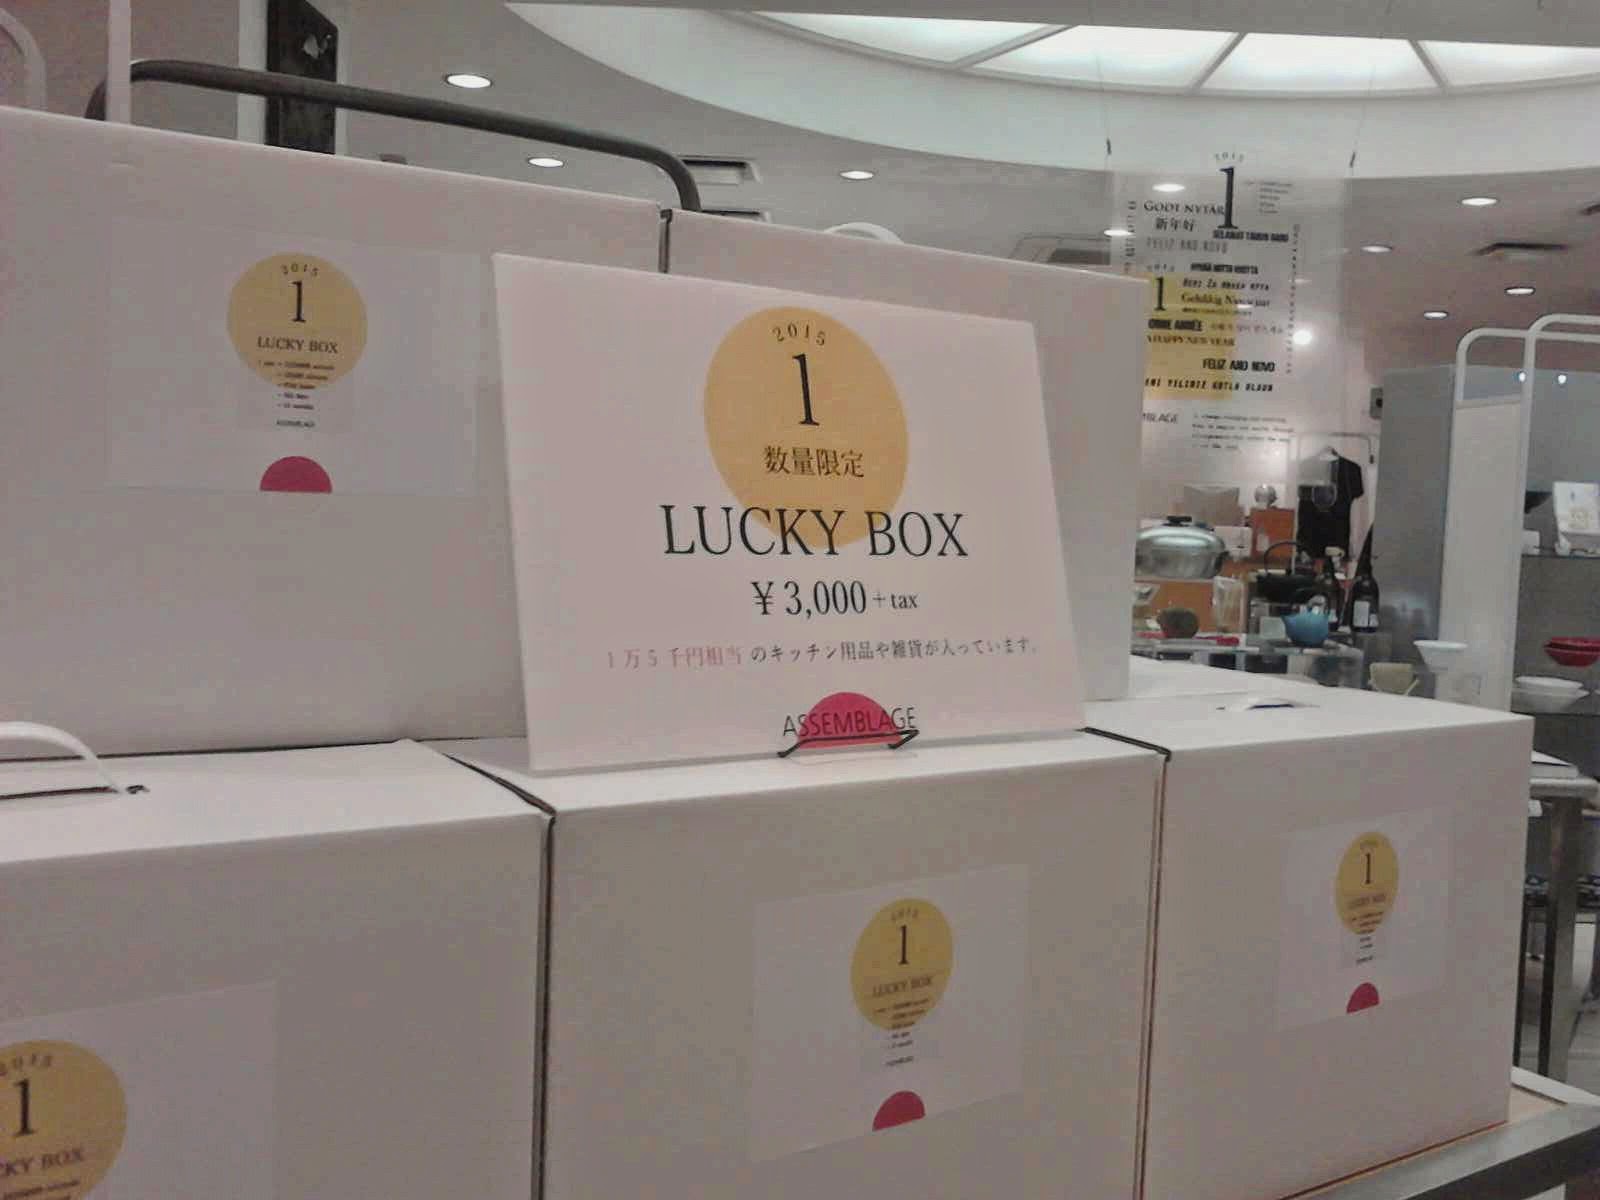 voyage to ASSEMBLAGE: LUCKY BOX 販売開始しました！